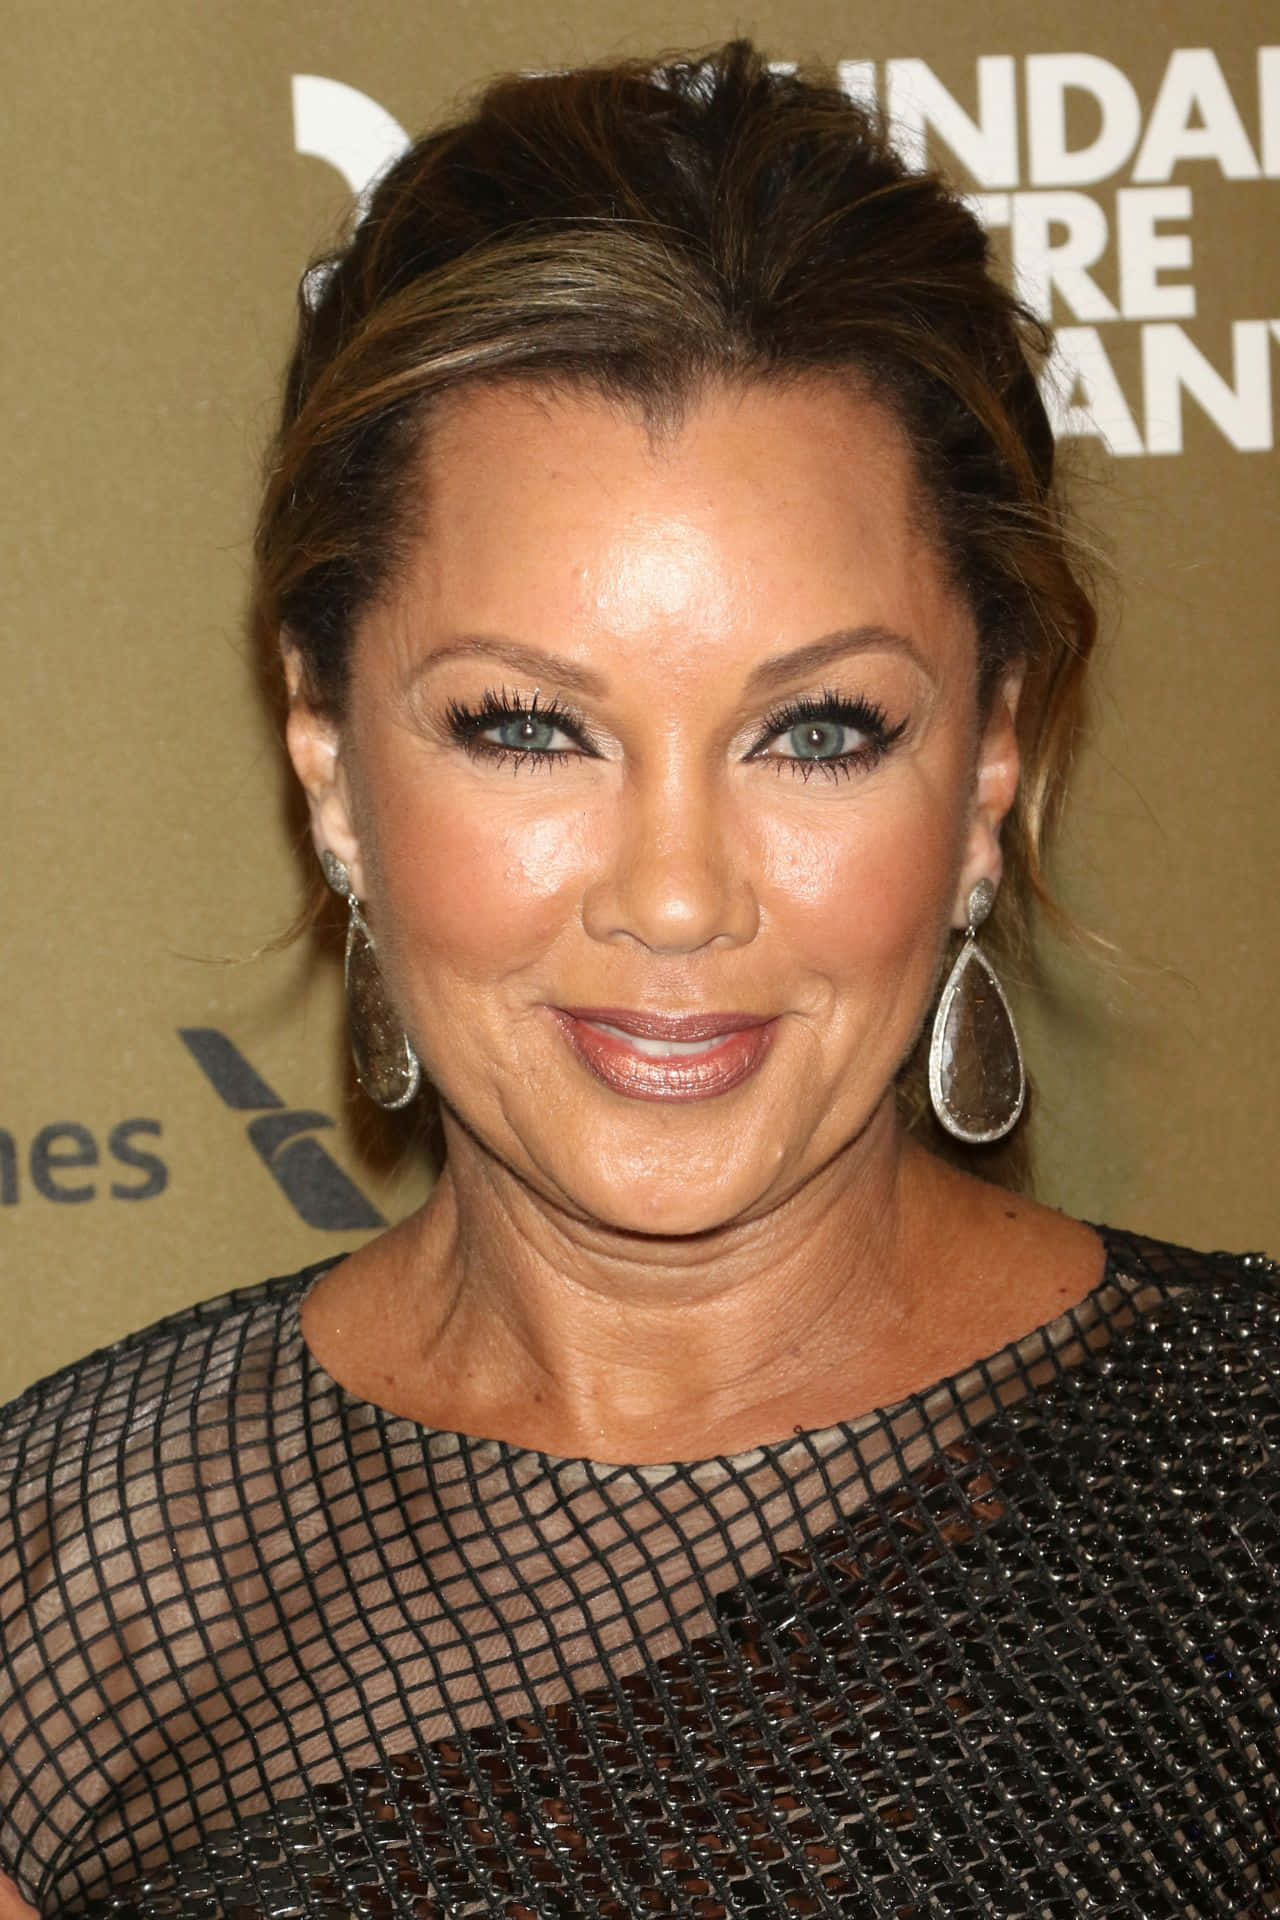 Actress Vanessa Williams at the 42nd Annual Daytime Emmy Awards